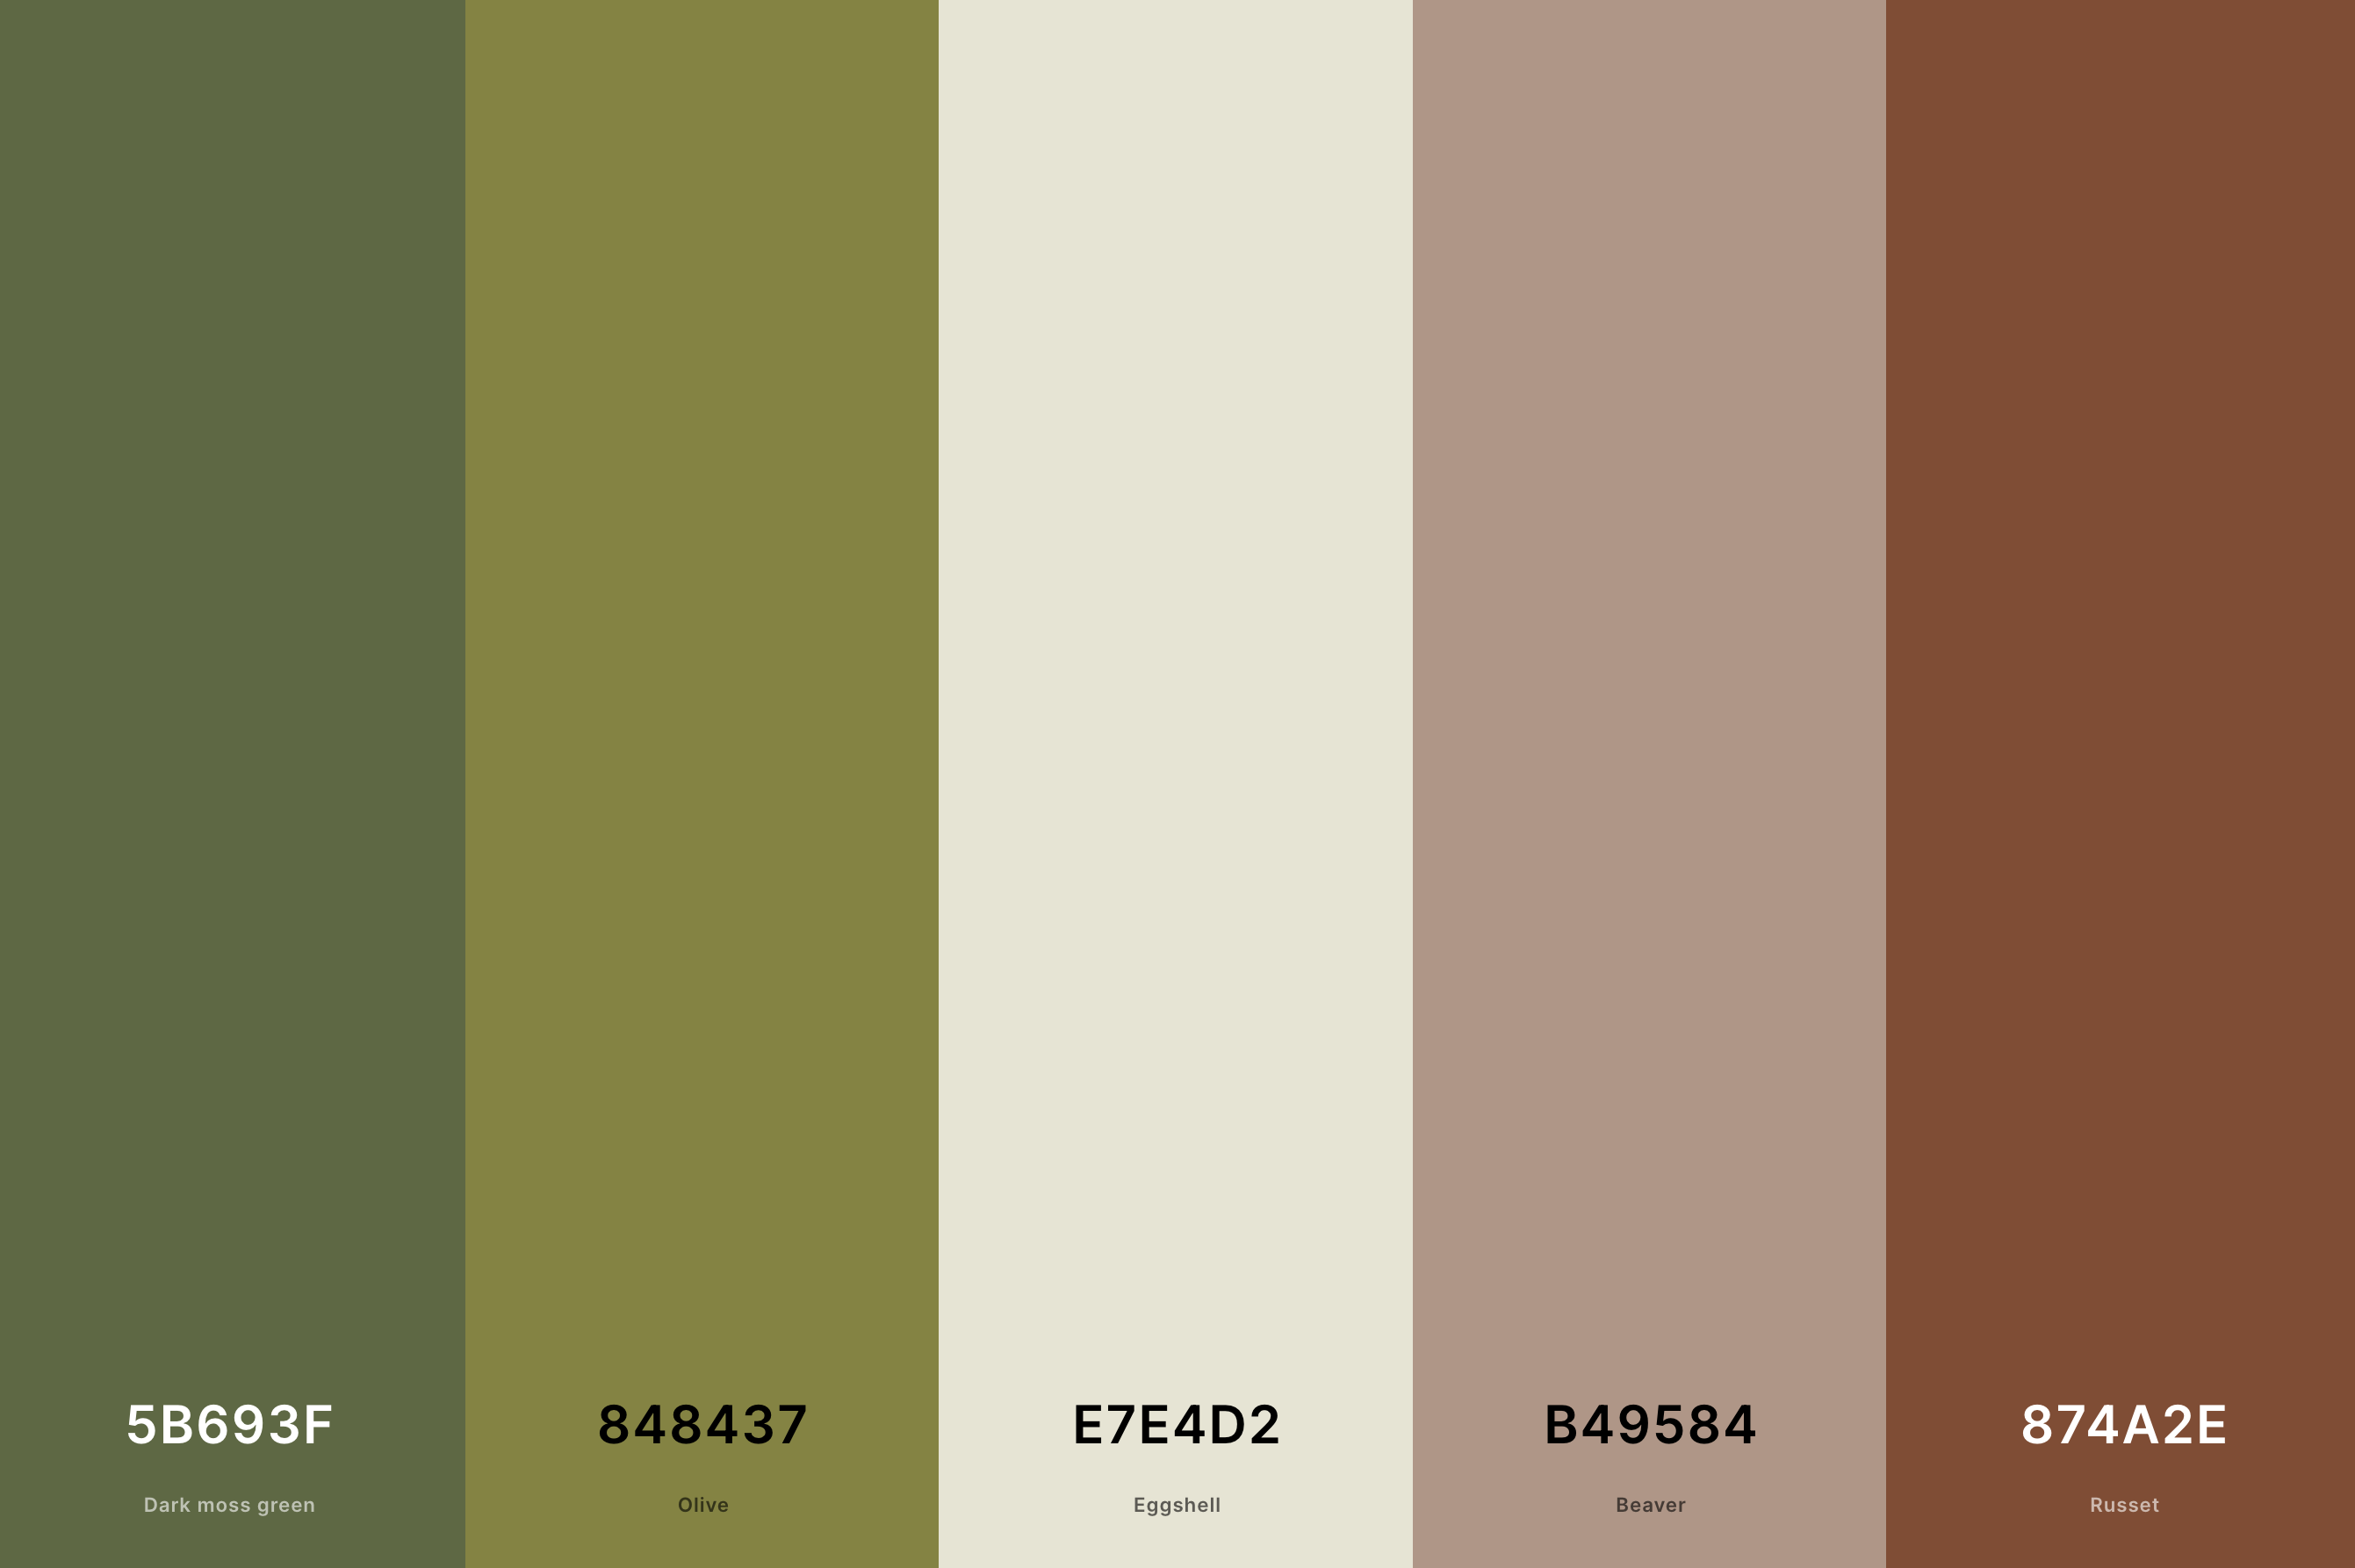 6. Olive And Terracotta Color Palette Color Palette with Dark Moss Green (Hex #5B693F) + Olive (Hex #848437) + Eggshell (Hex #E7E4D2) + Beaver (Hex #B49584) + Russet (Hex #874A2E) Color Palette with Hex Codes